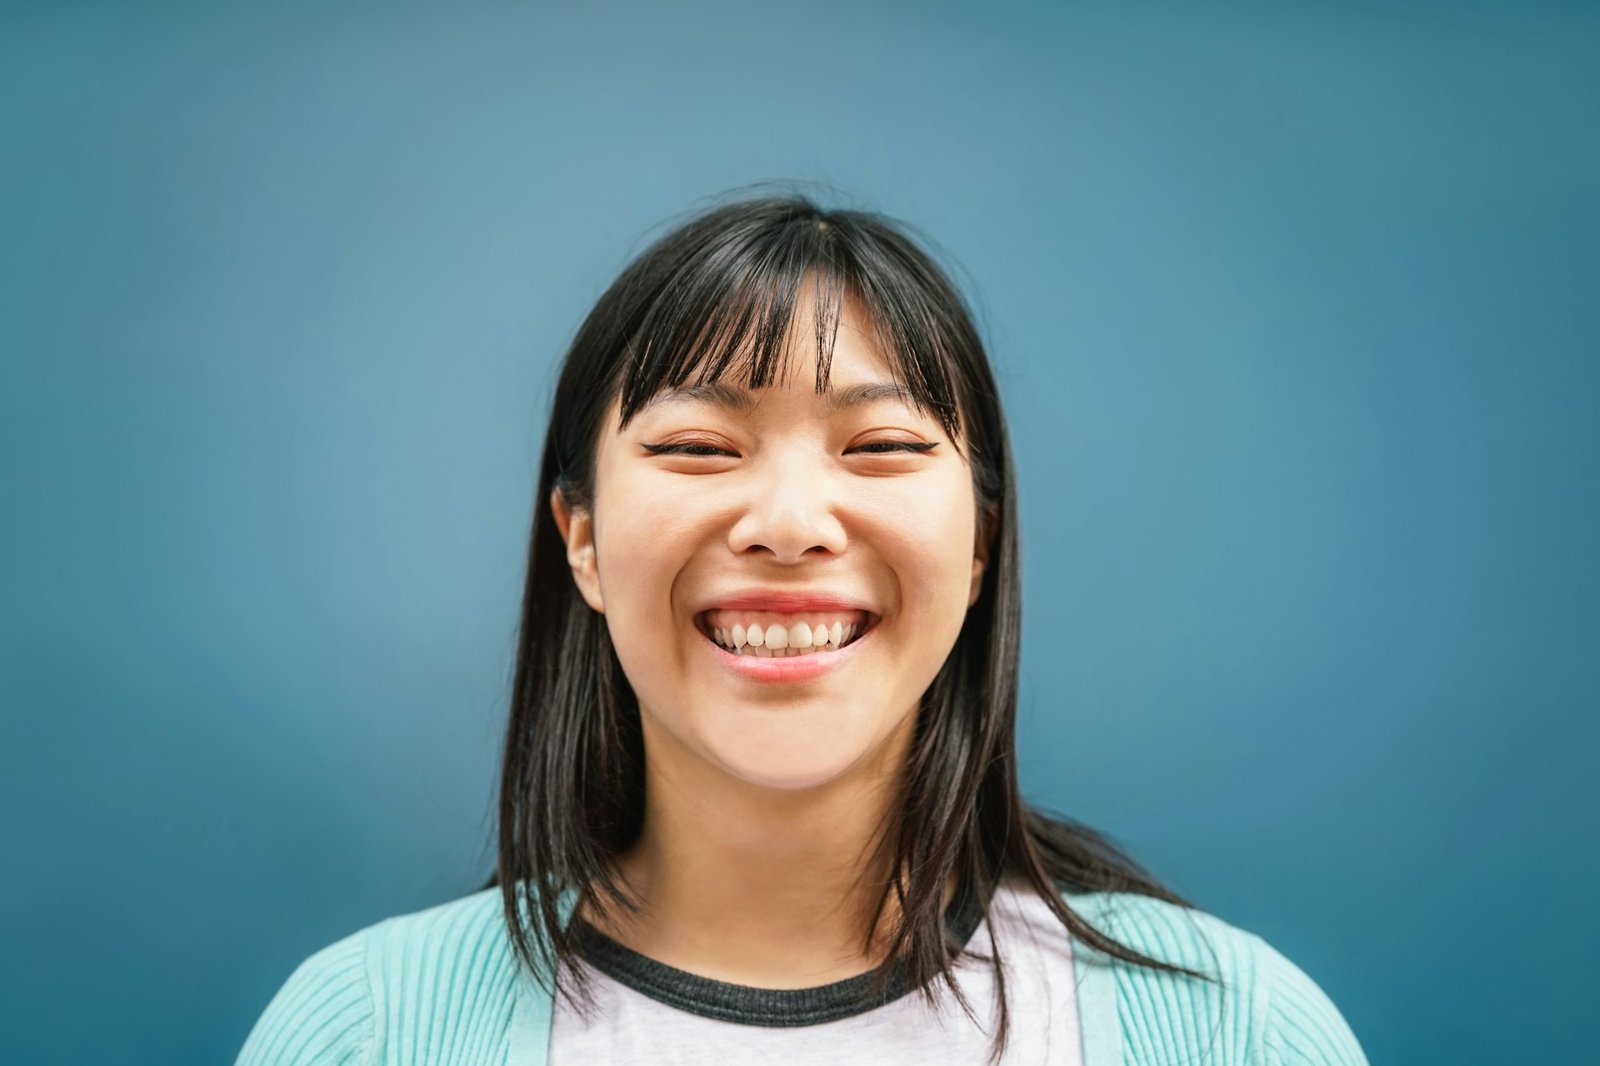 Portrait of young Asian girl smiling at camera